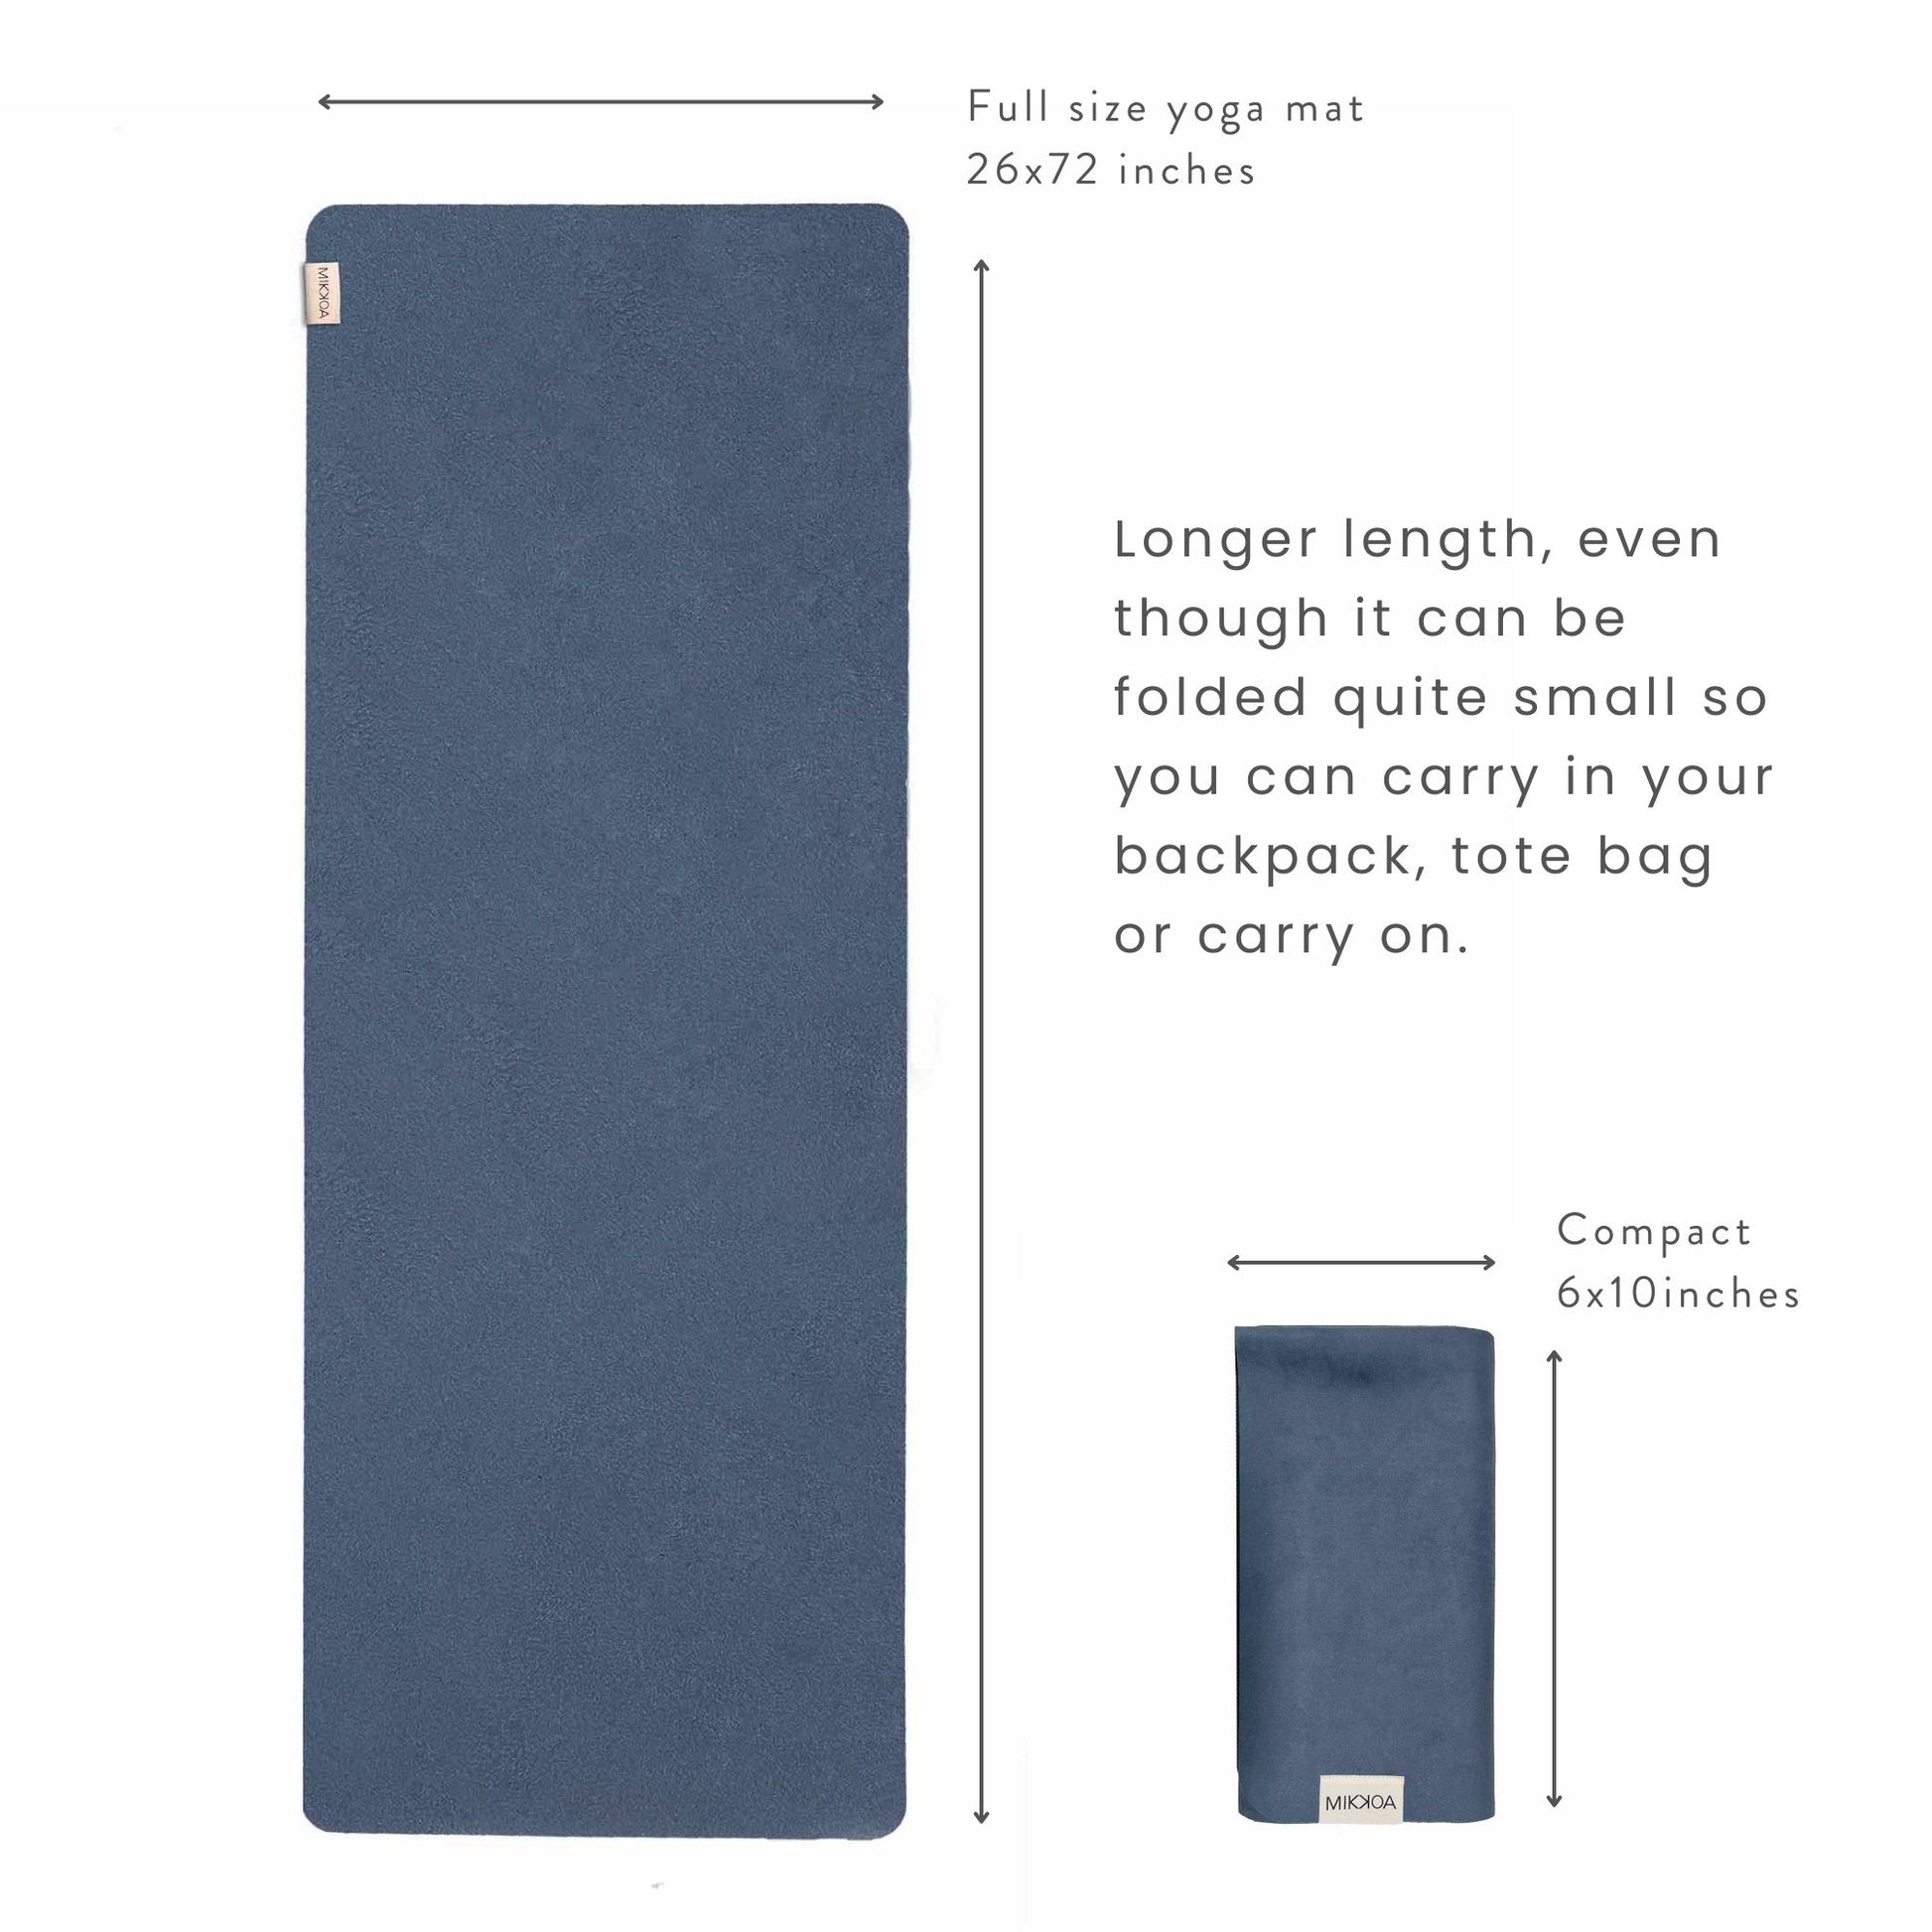 Best Foldable Yoga Mat- Folded and Open Blue Yoga Mat-Mikkoa Best Foldable Yoga Mat